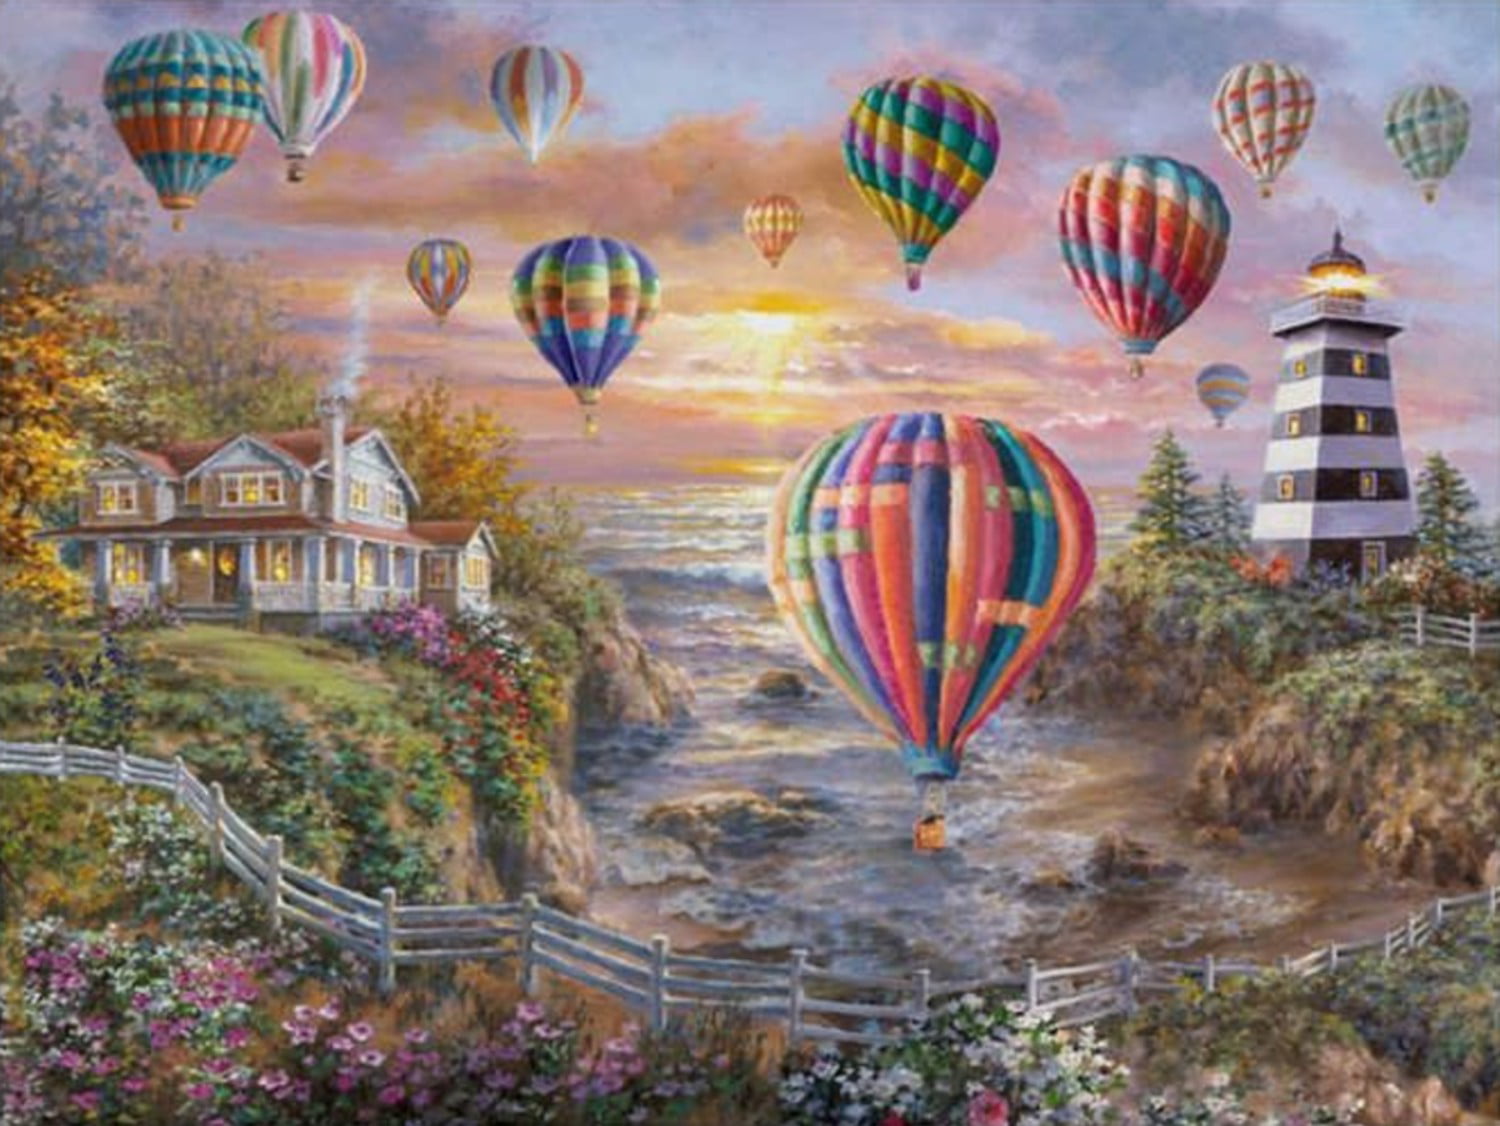 1000 Piece Jigsaw Puzzle "Balloons Over Cottage Cove Cardinal Puzzle Free Ship 